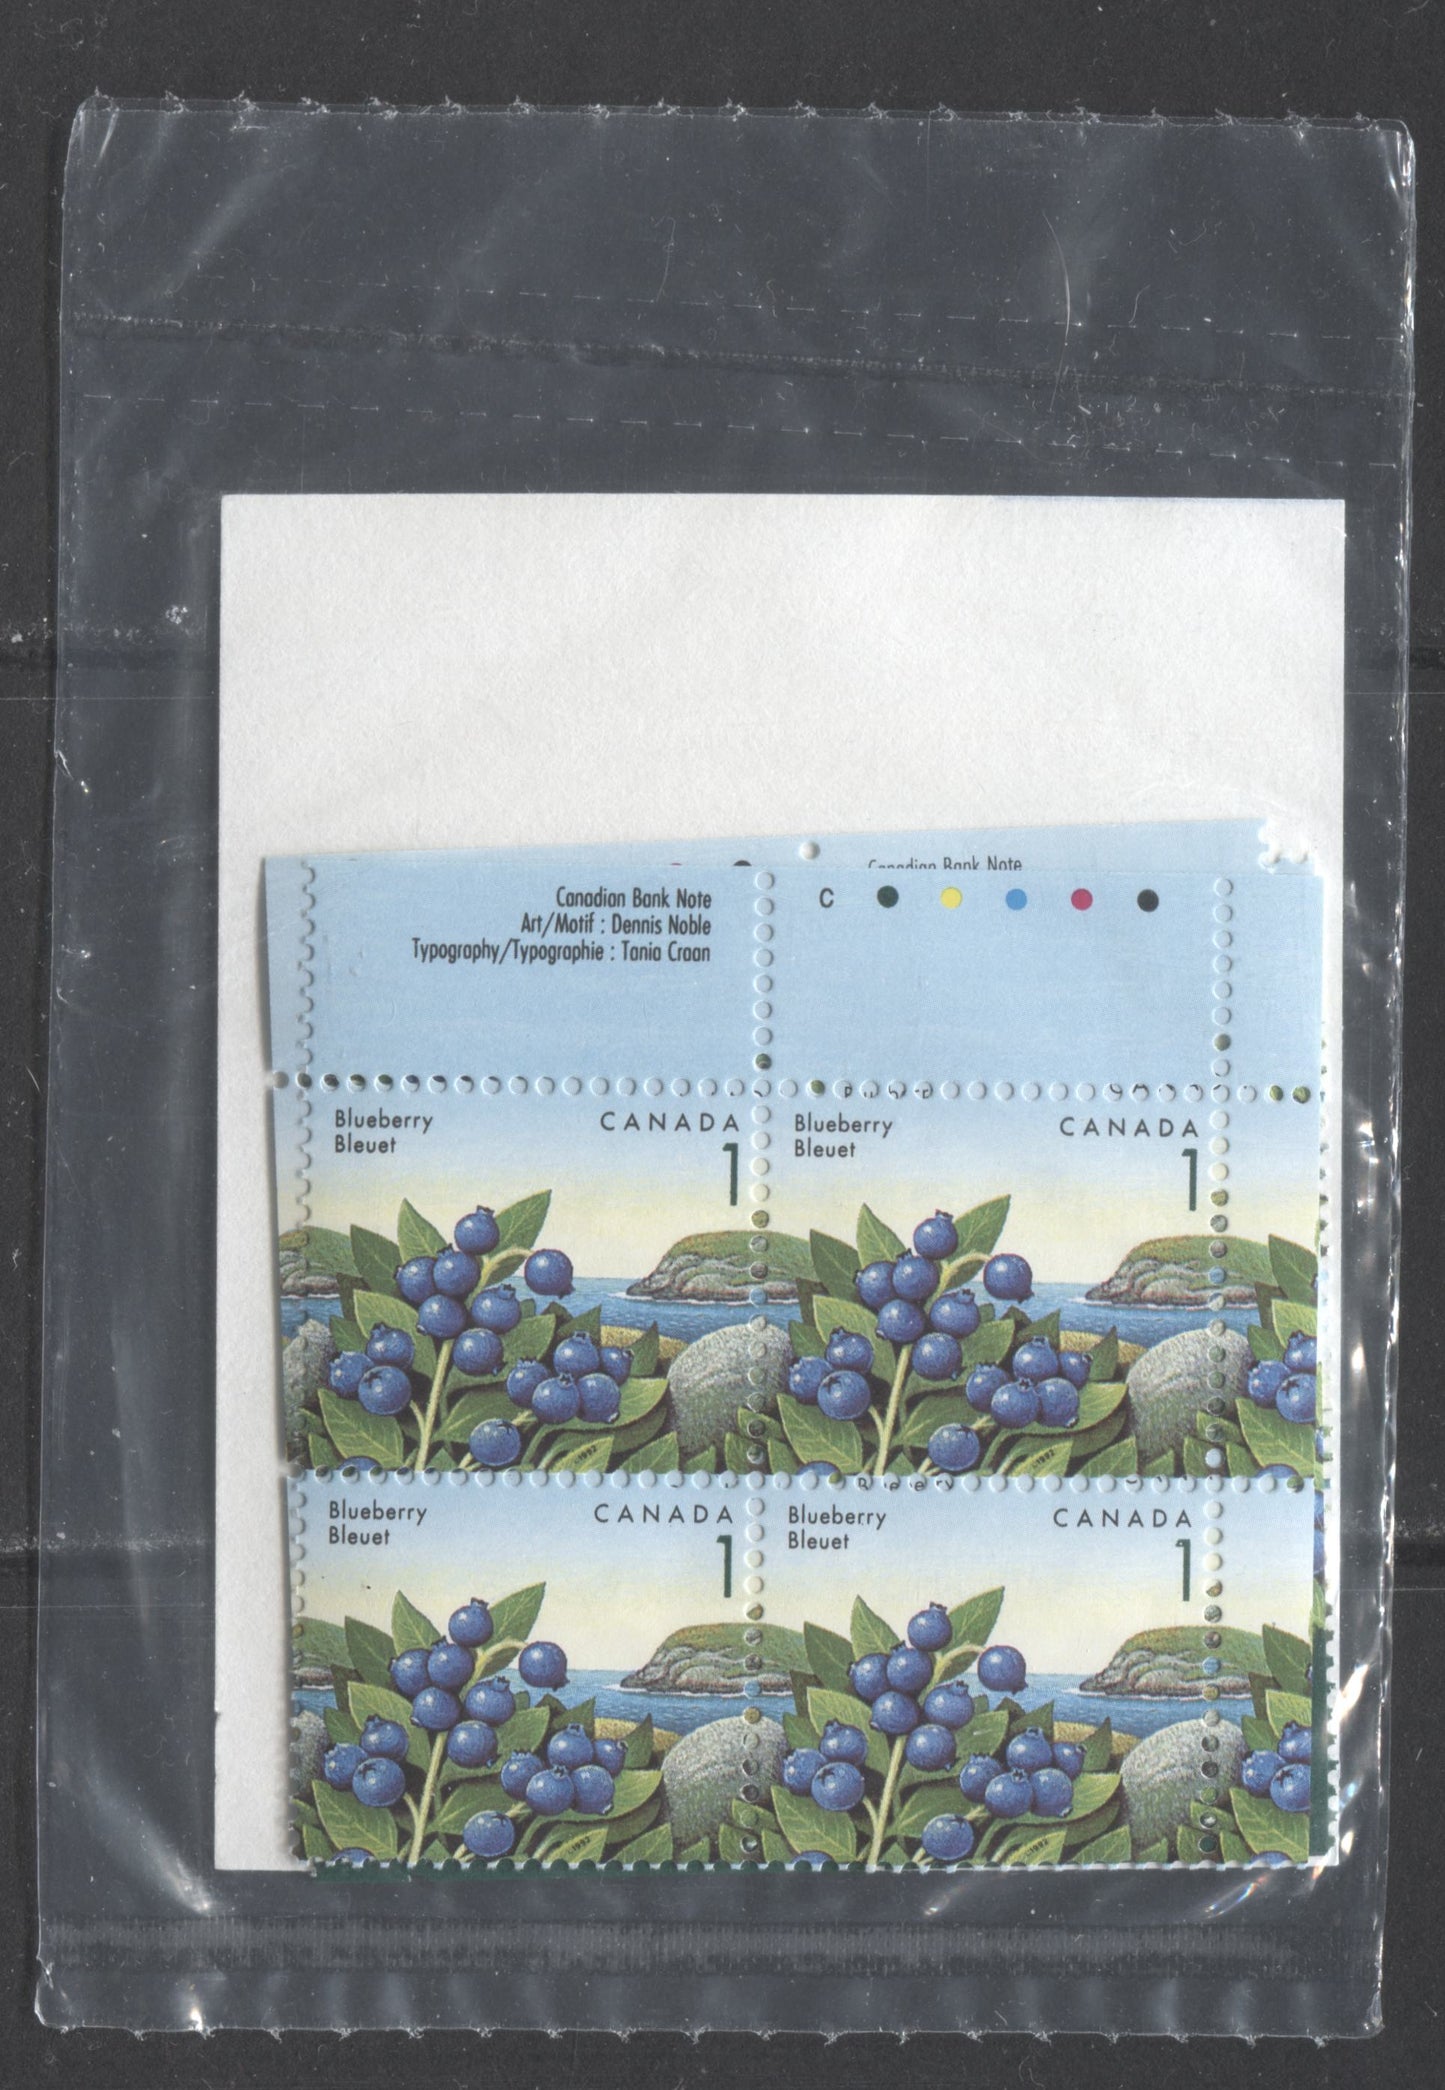 Lot 3 Canada #1349i 1c Multicoloured 1992 - 1998 Edible Berries Definitive Issue, Canada Post Sealed Pack of Inscription Blocks, CBN Printing On DF CPP Paper, With HB Type 6B Insert Card, VFNH, Unitrade Cat. $13.75